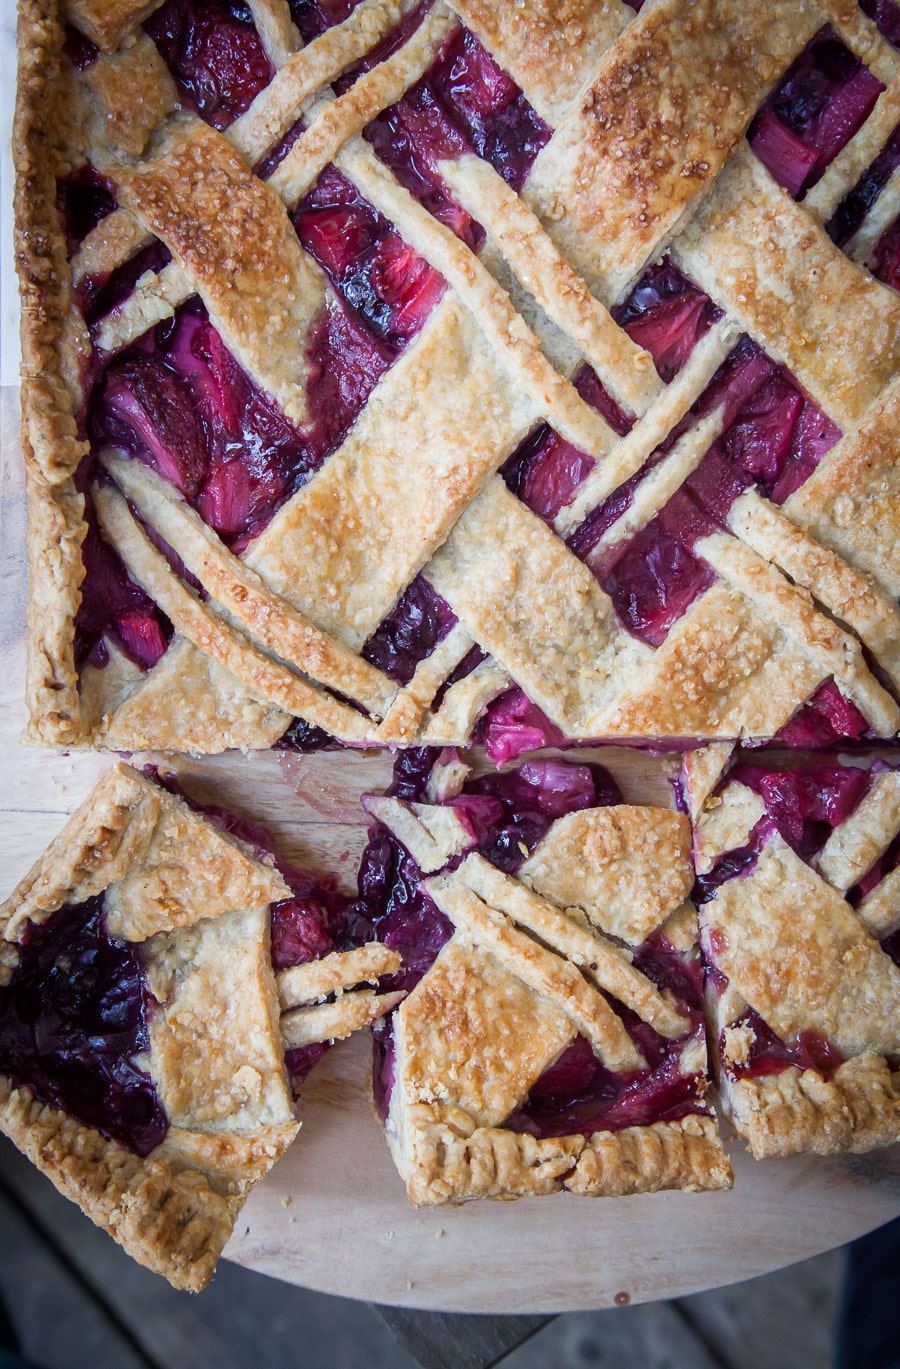 Rhubarb Berry Slab Pie. Photo and recipe by Irvin Lin of Eat the Love.